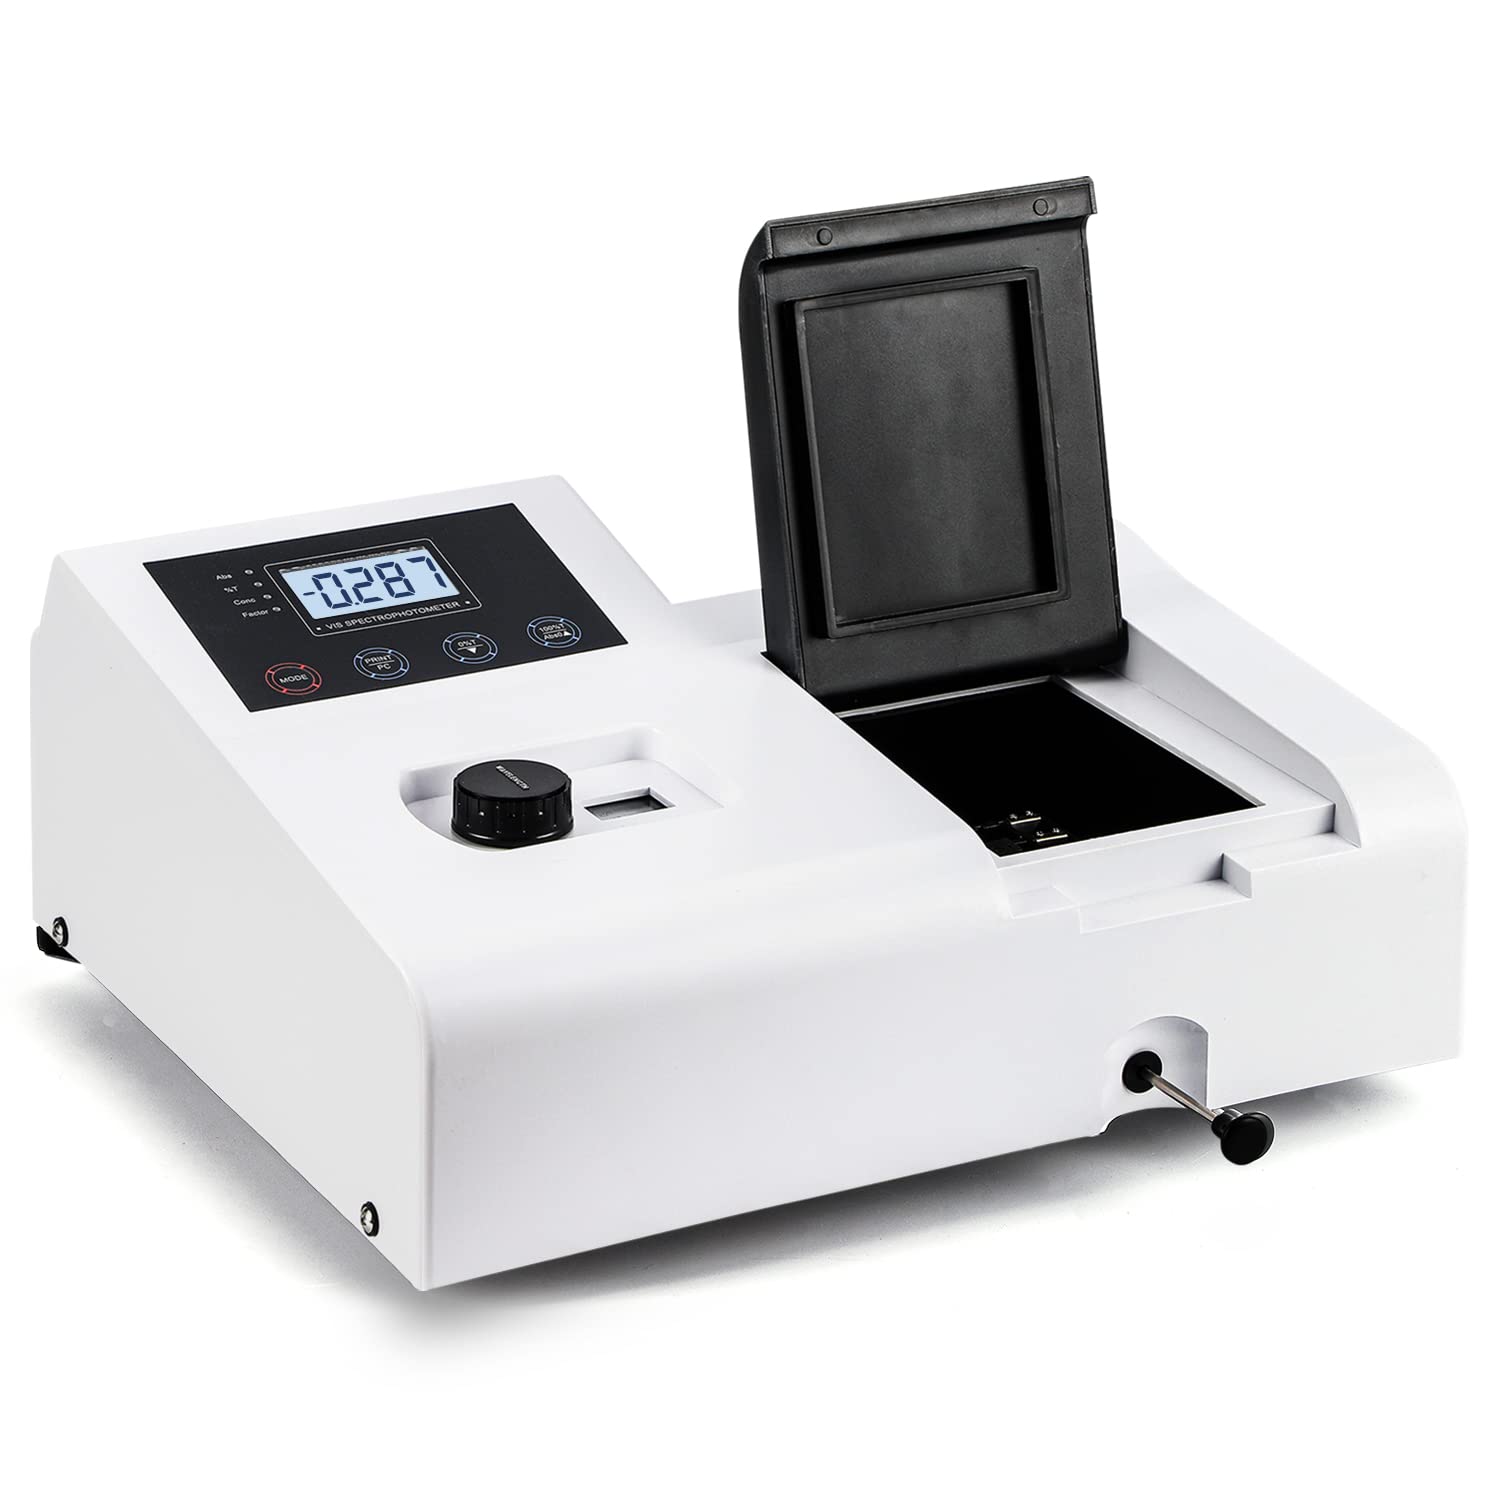 Spectrophotometer and Accessory